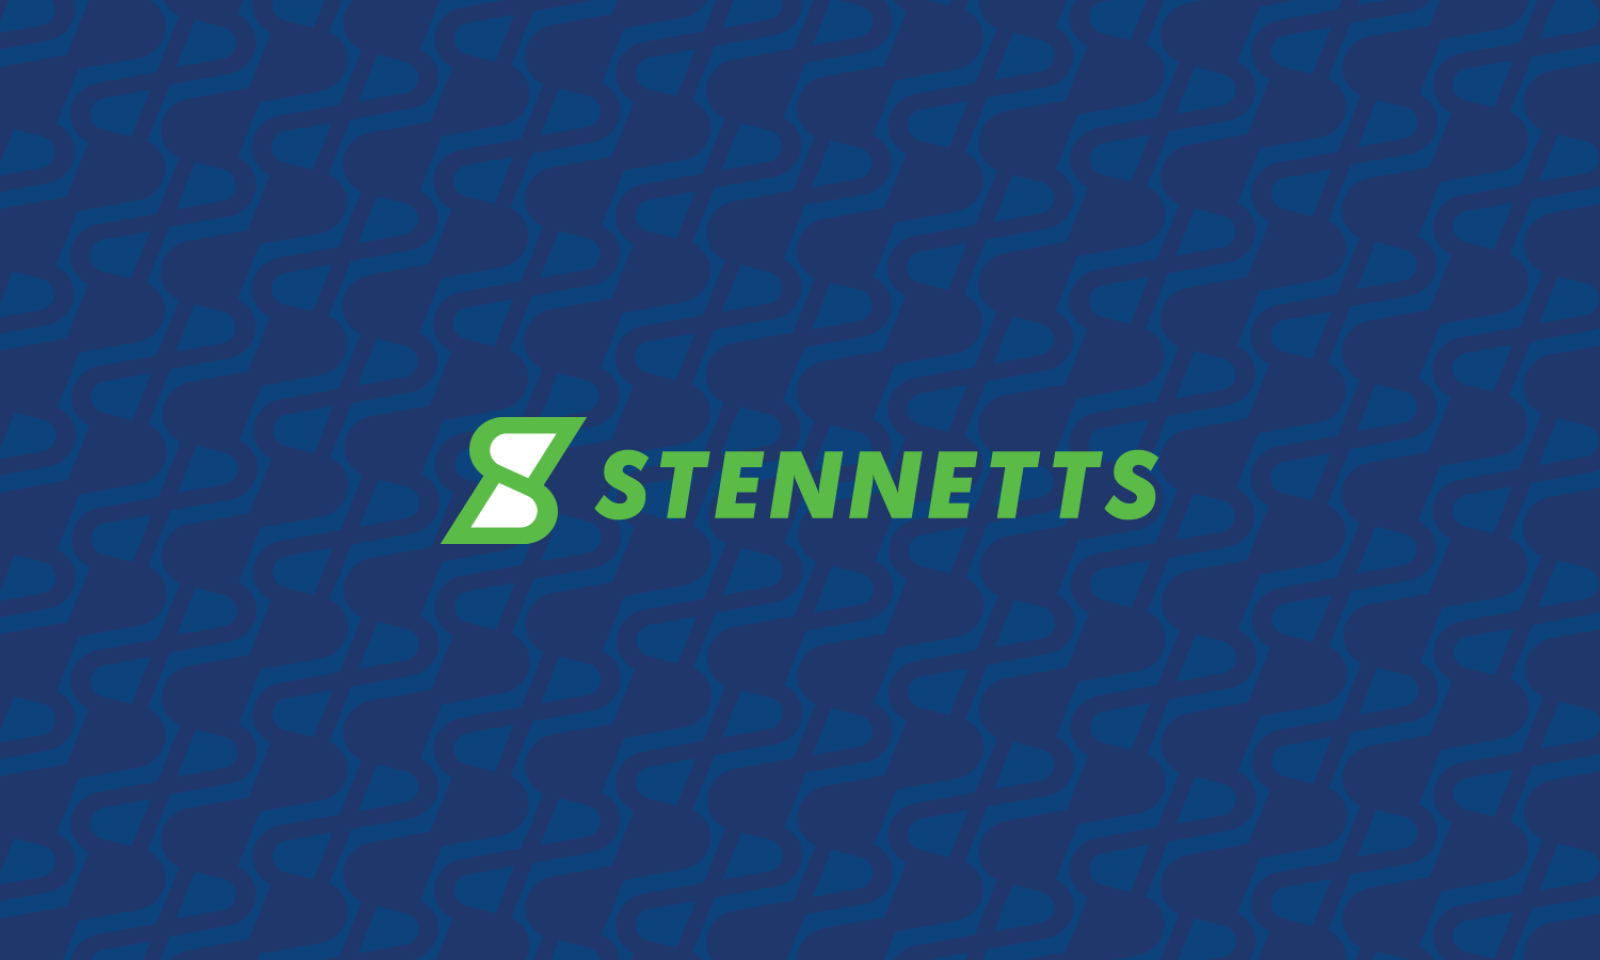 logo-stennetts-corporate-identity-agency-graphic-design-canterbury.png